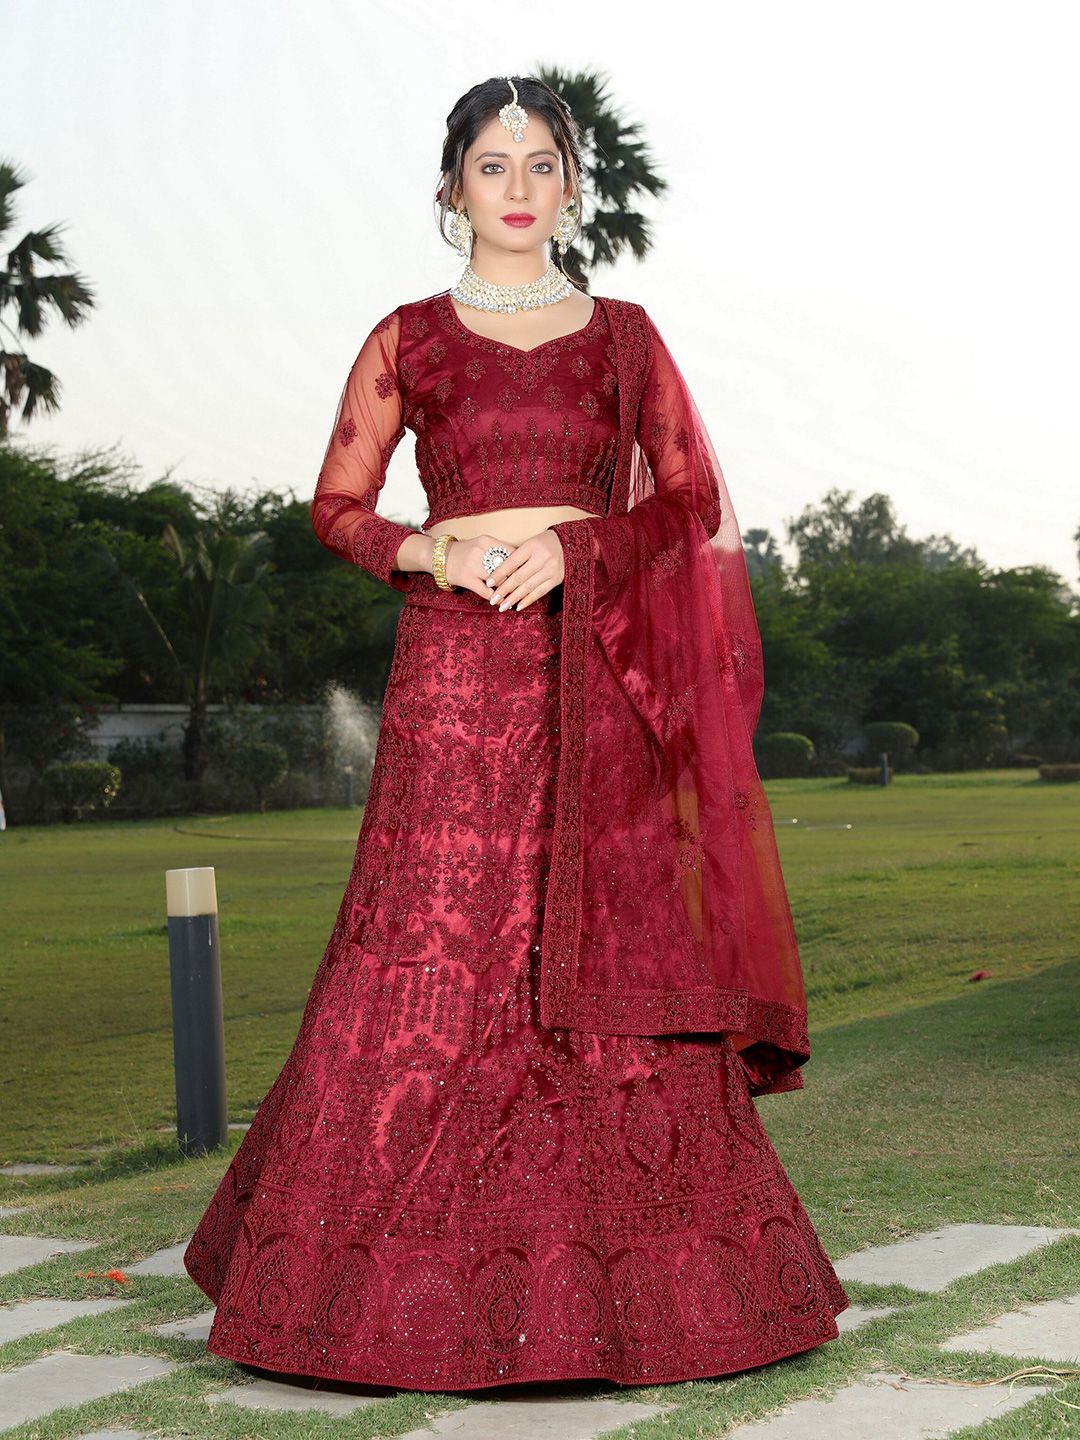 ASPORA Maroon Embroidered Beads and Stones Semi-Stitched Lehenga & Unstitched Blouse With Dupatta Price in India